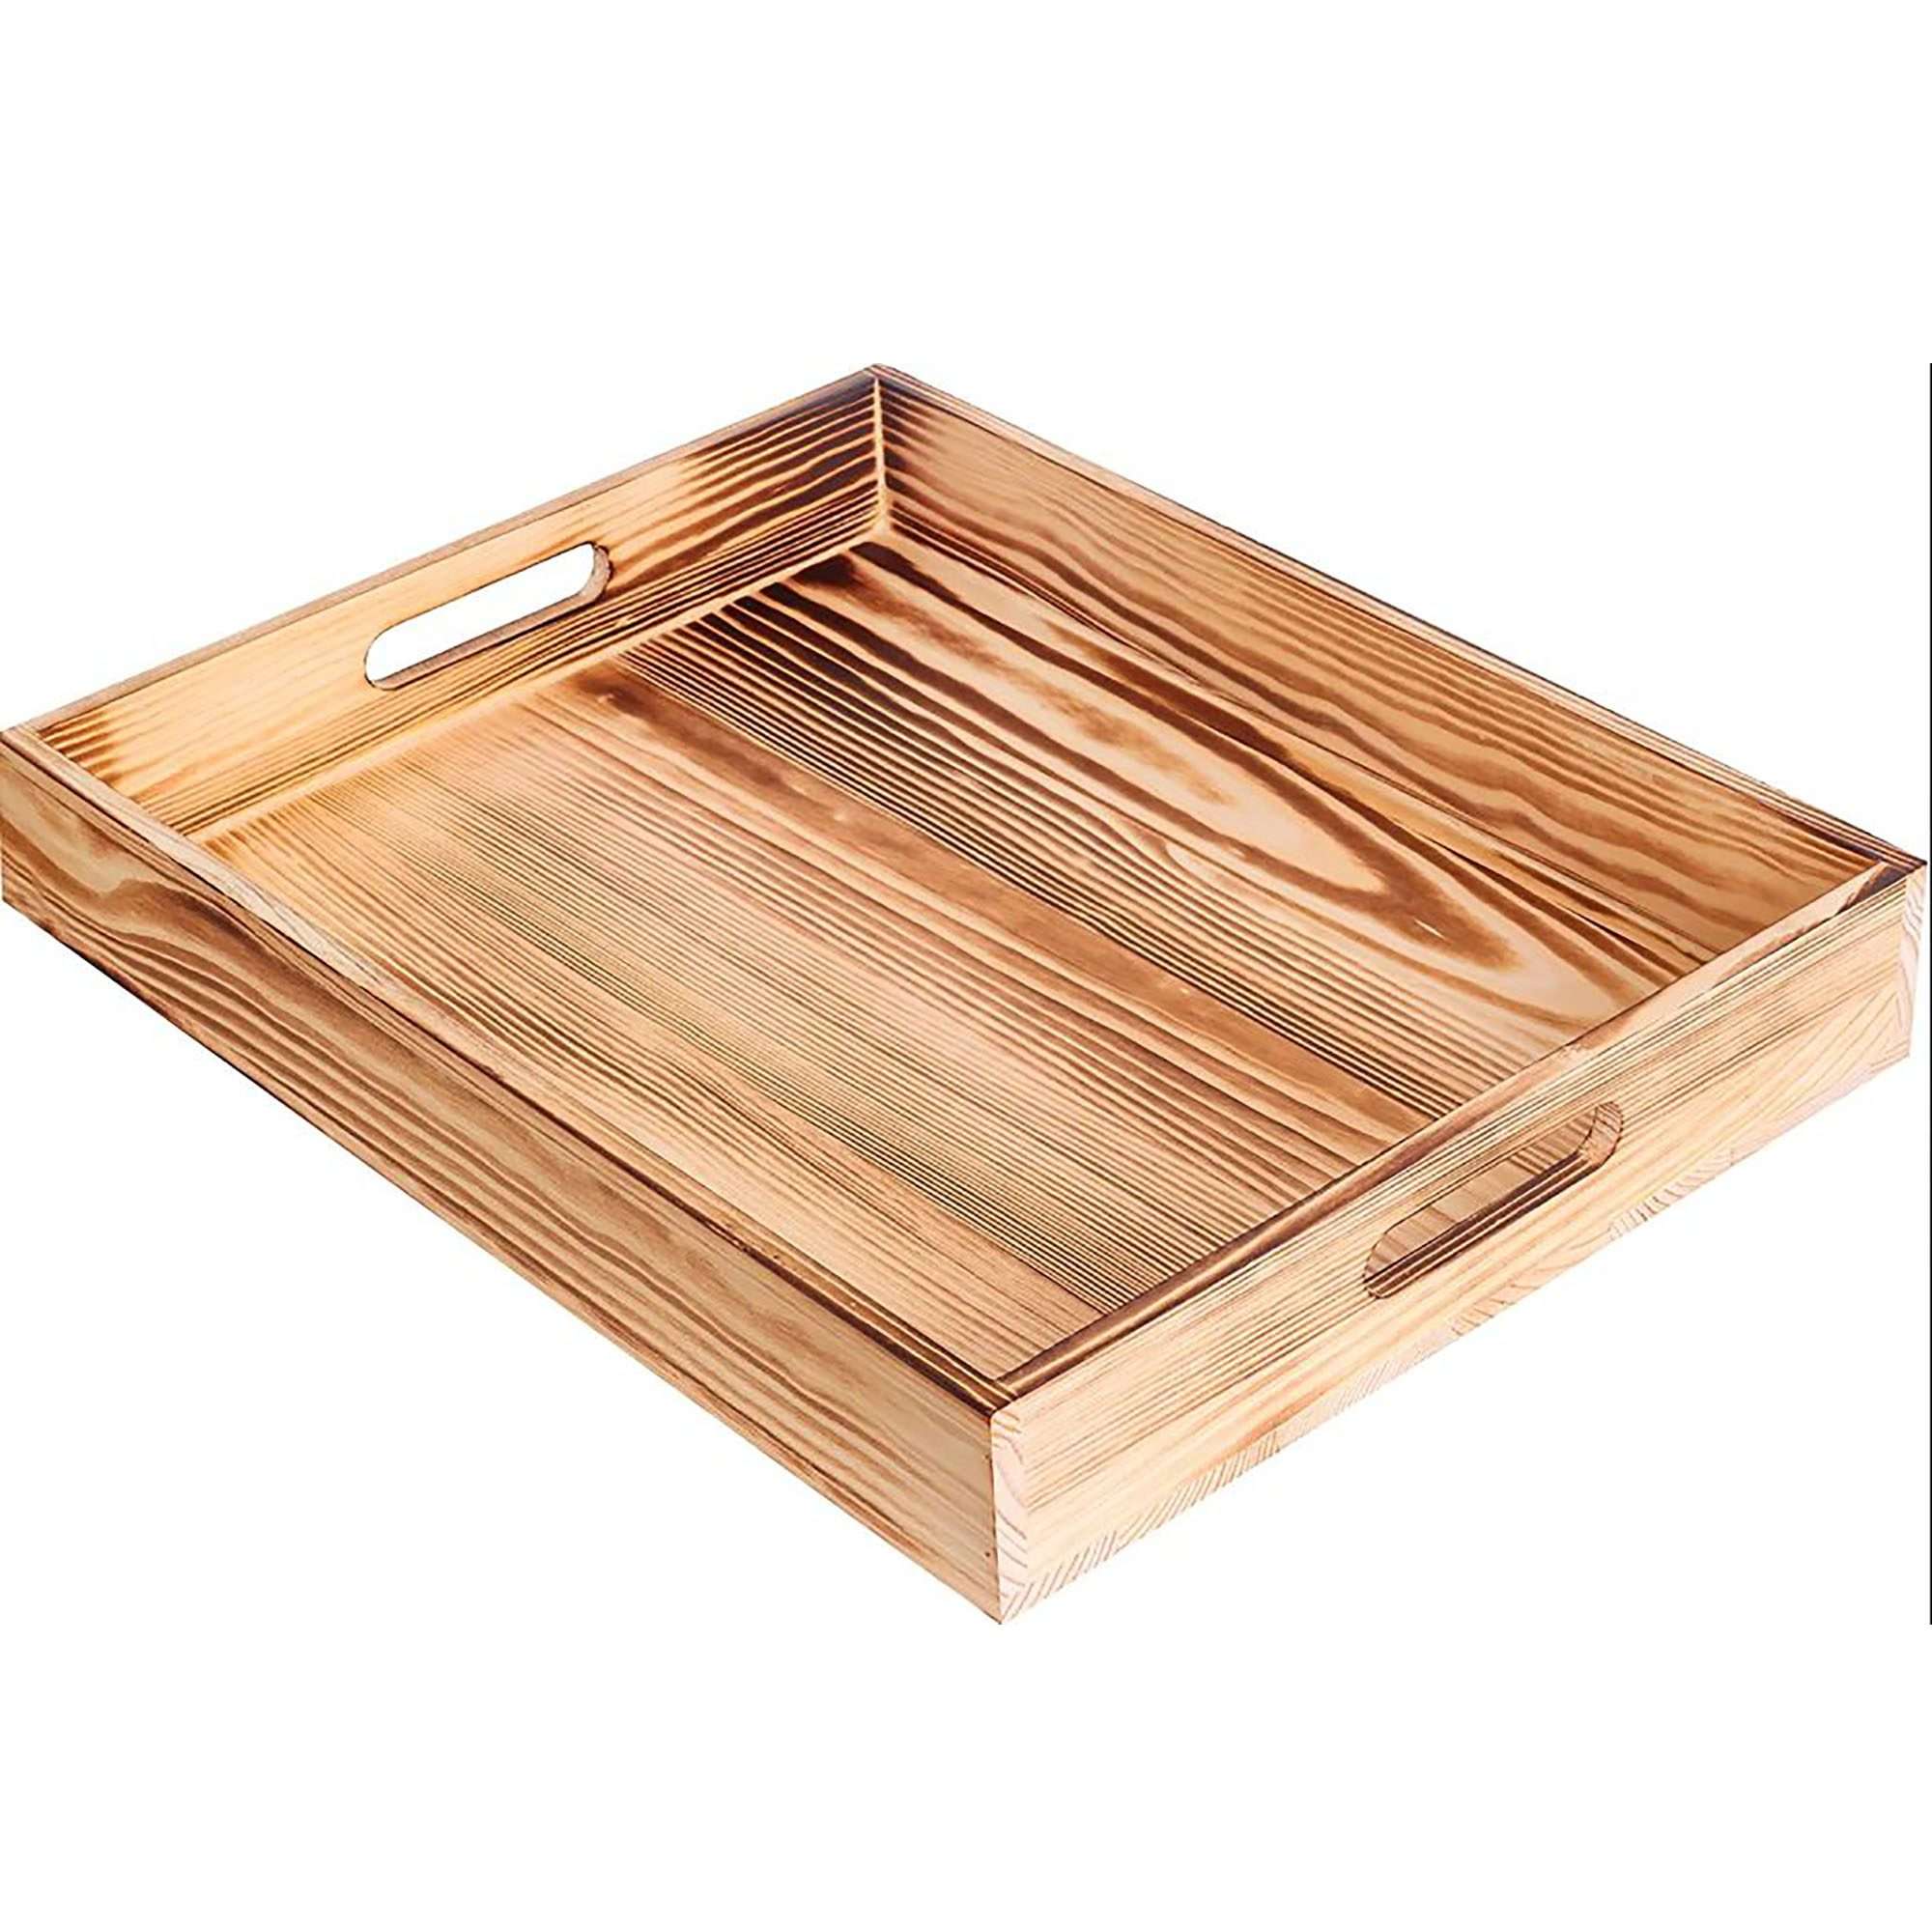 Wooden serving tray for food ,Handcrafted Wood Serving Tray with Handles | Natural Large Serving tray